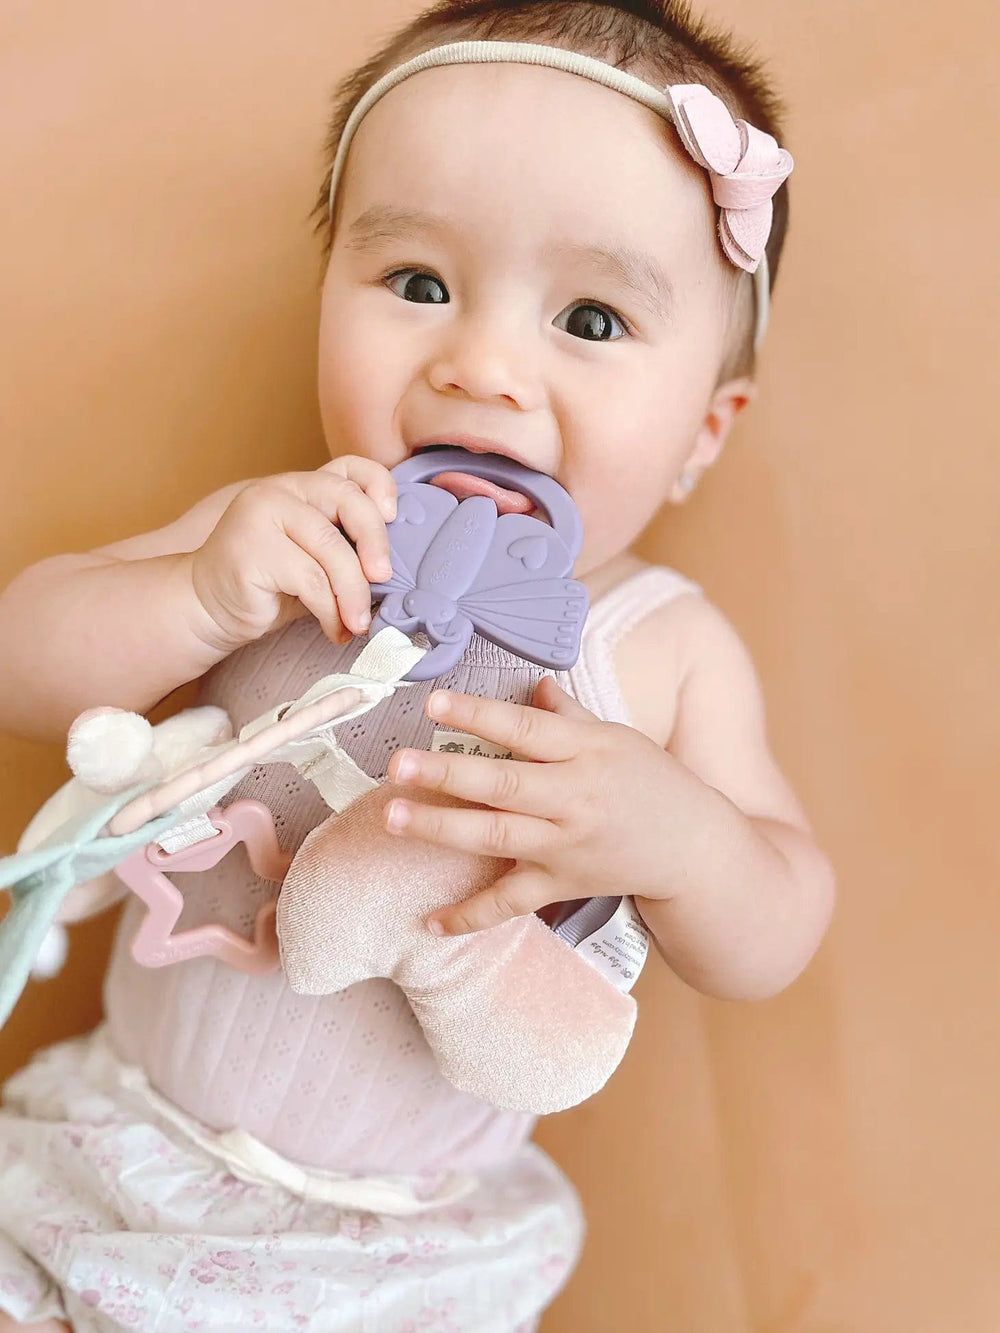 Bitzy Busy Ring™ Teething Activity Toy Bunny Itzy Ritzy Pacifiers & Teethers Lil Tulips